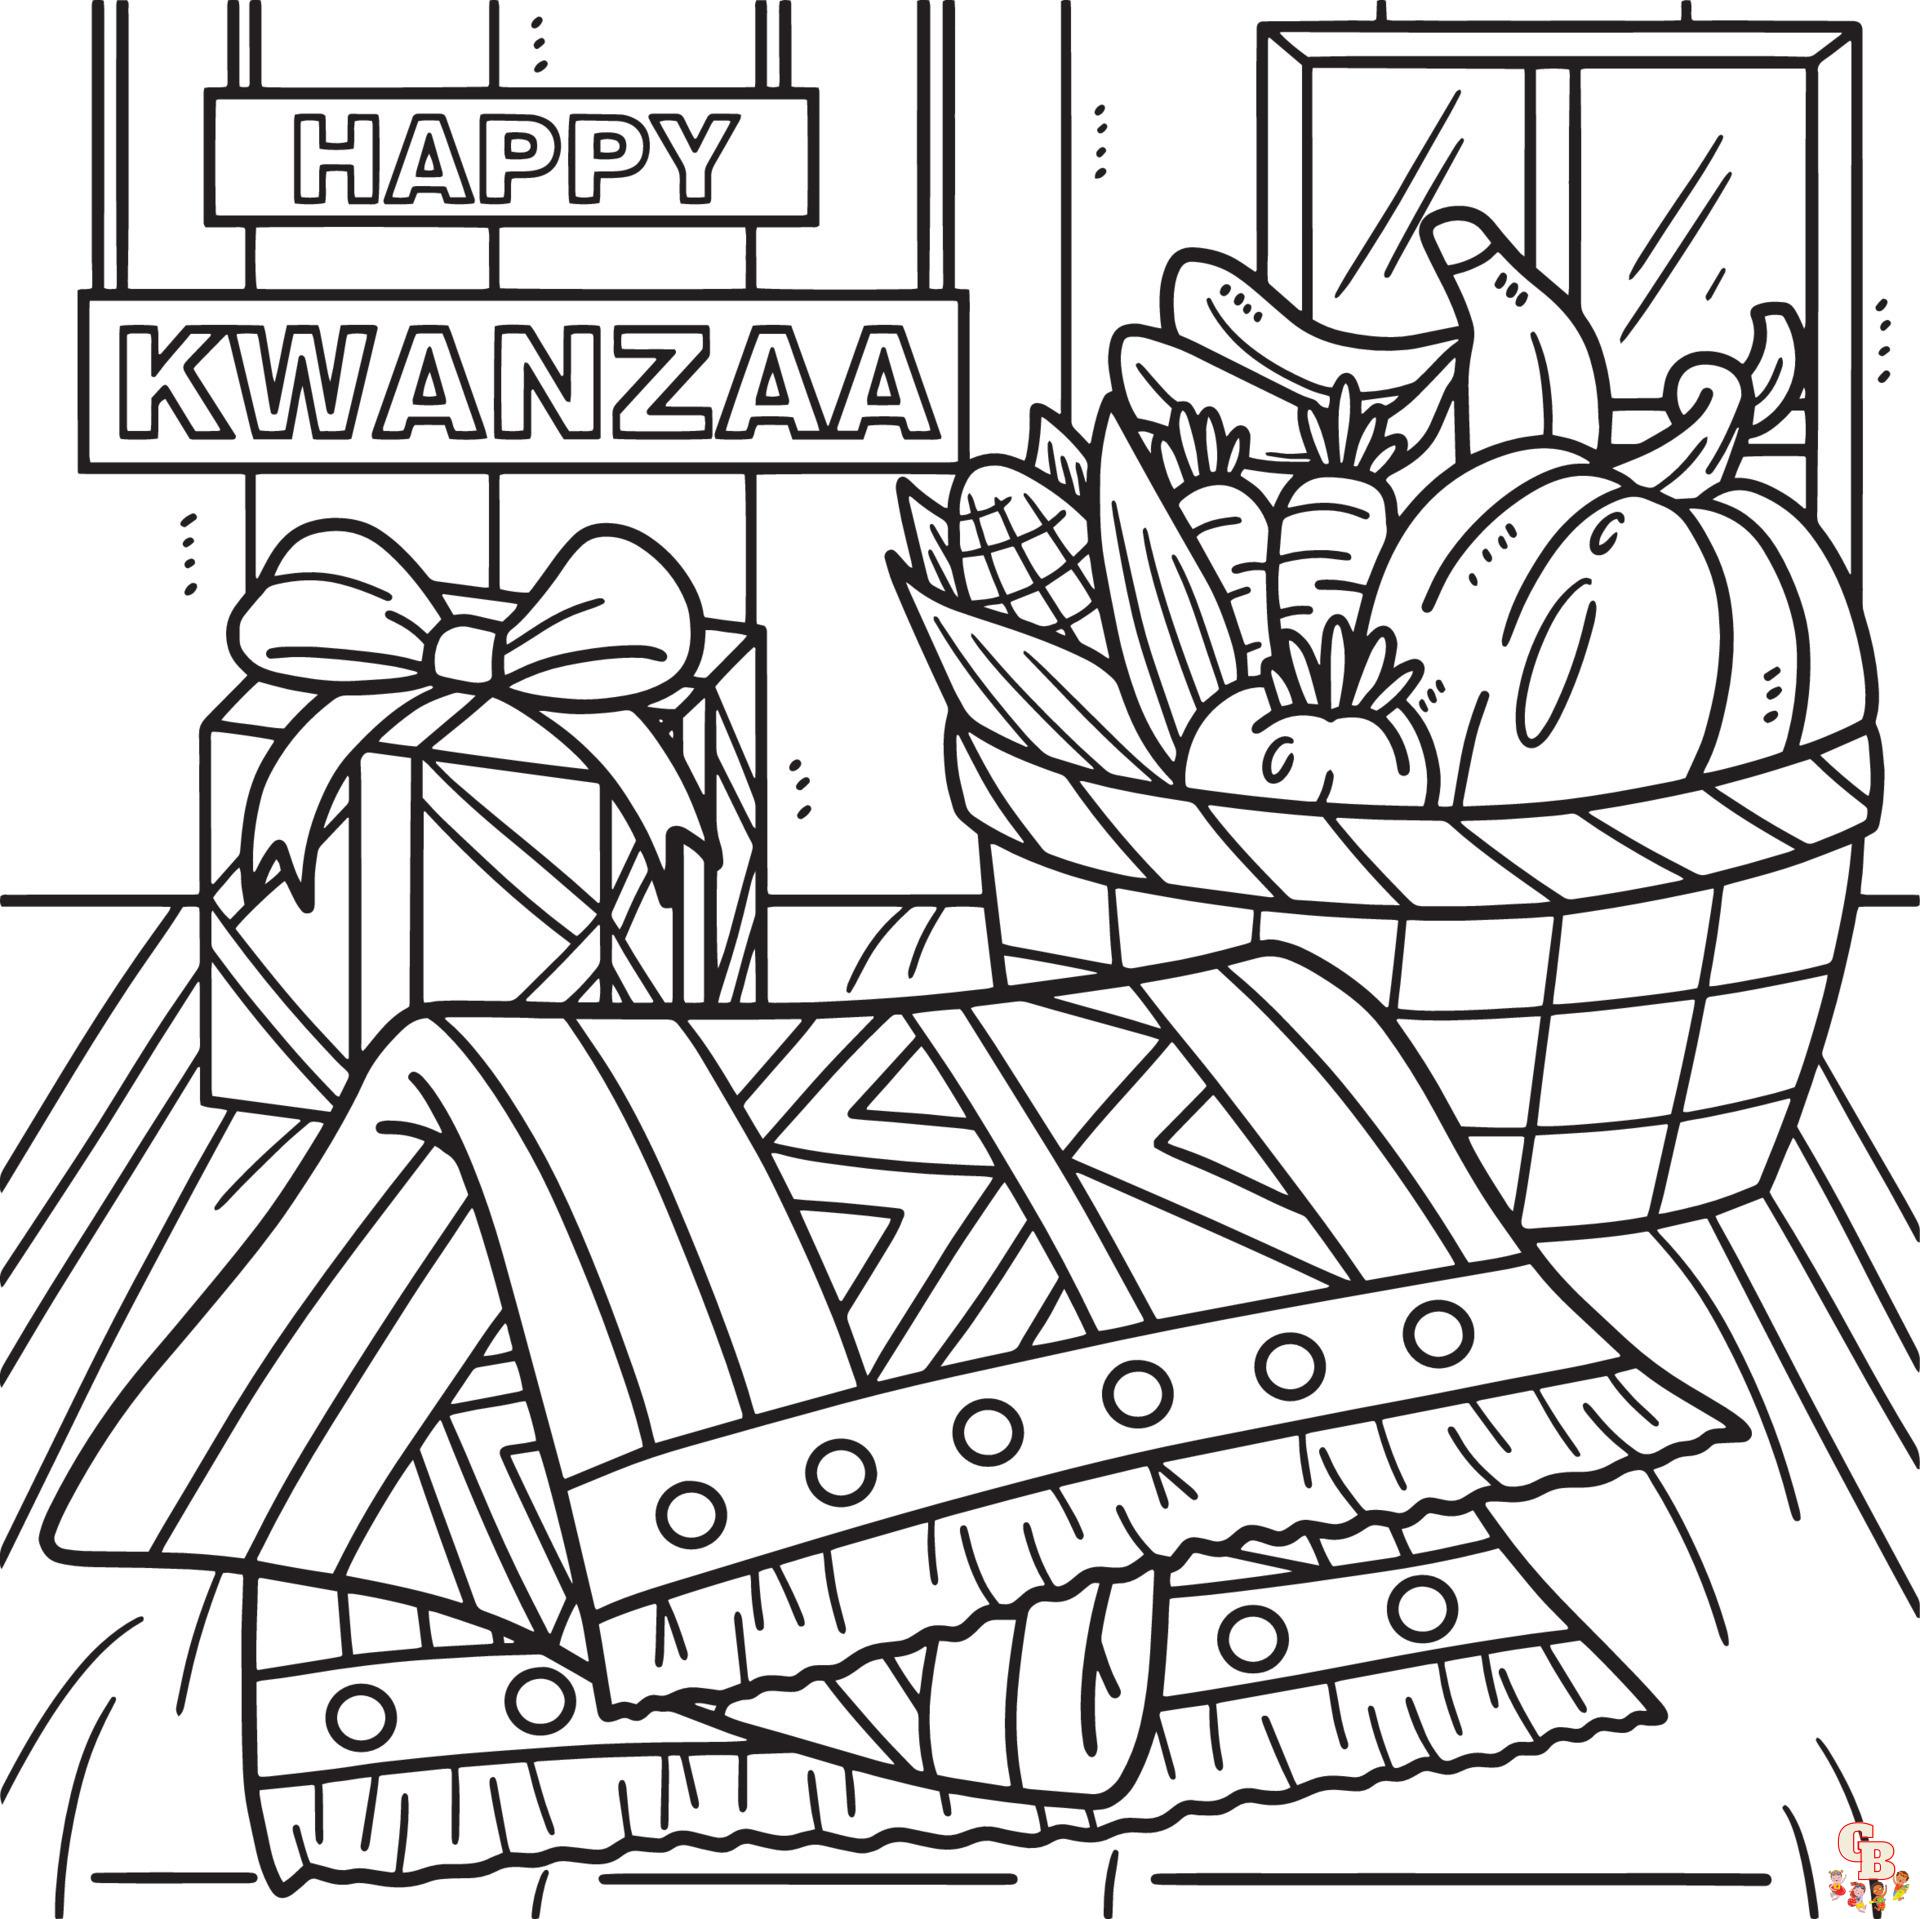 Celebrate Kwanzaa with Fun and Free Kwanzaa Coloring Pages